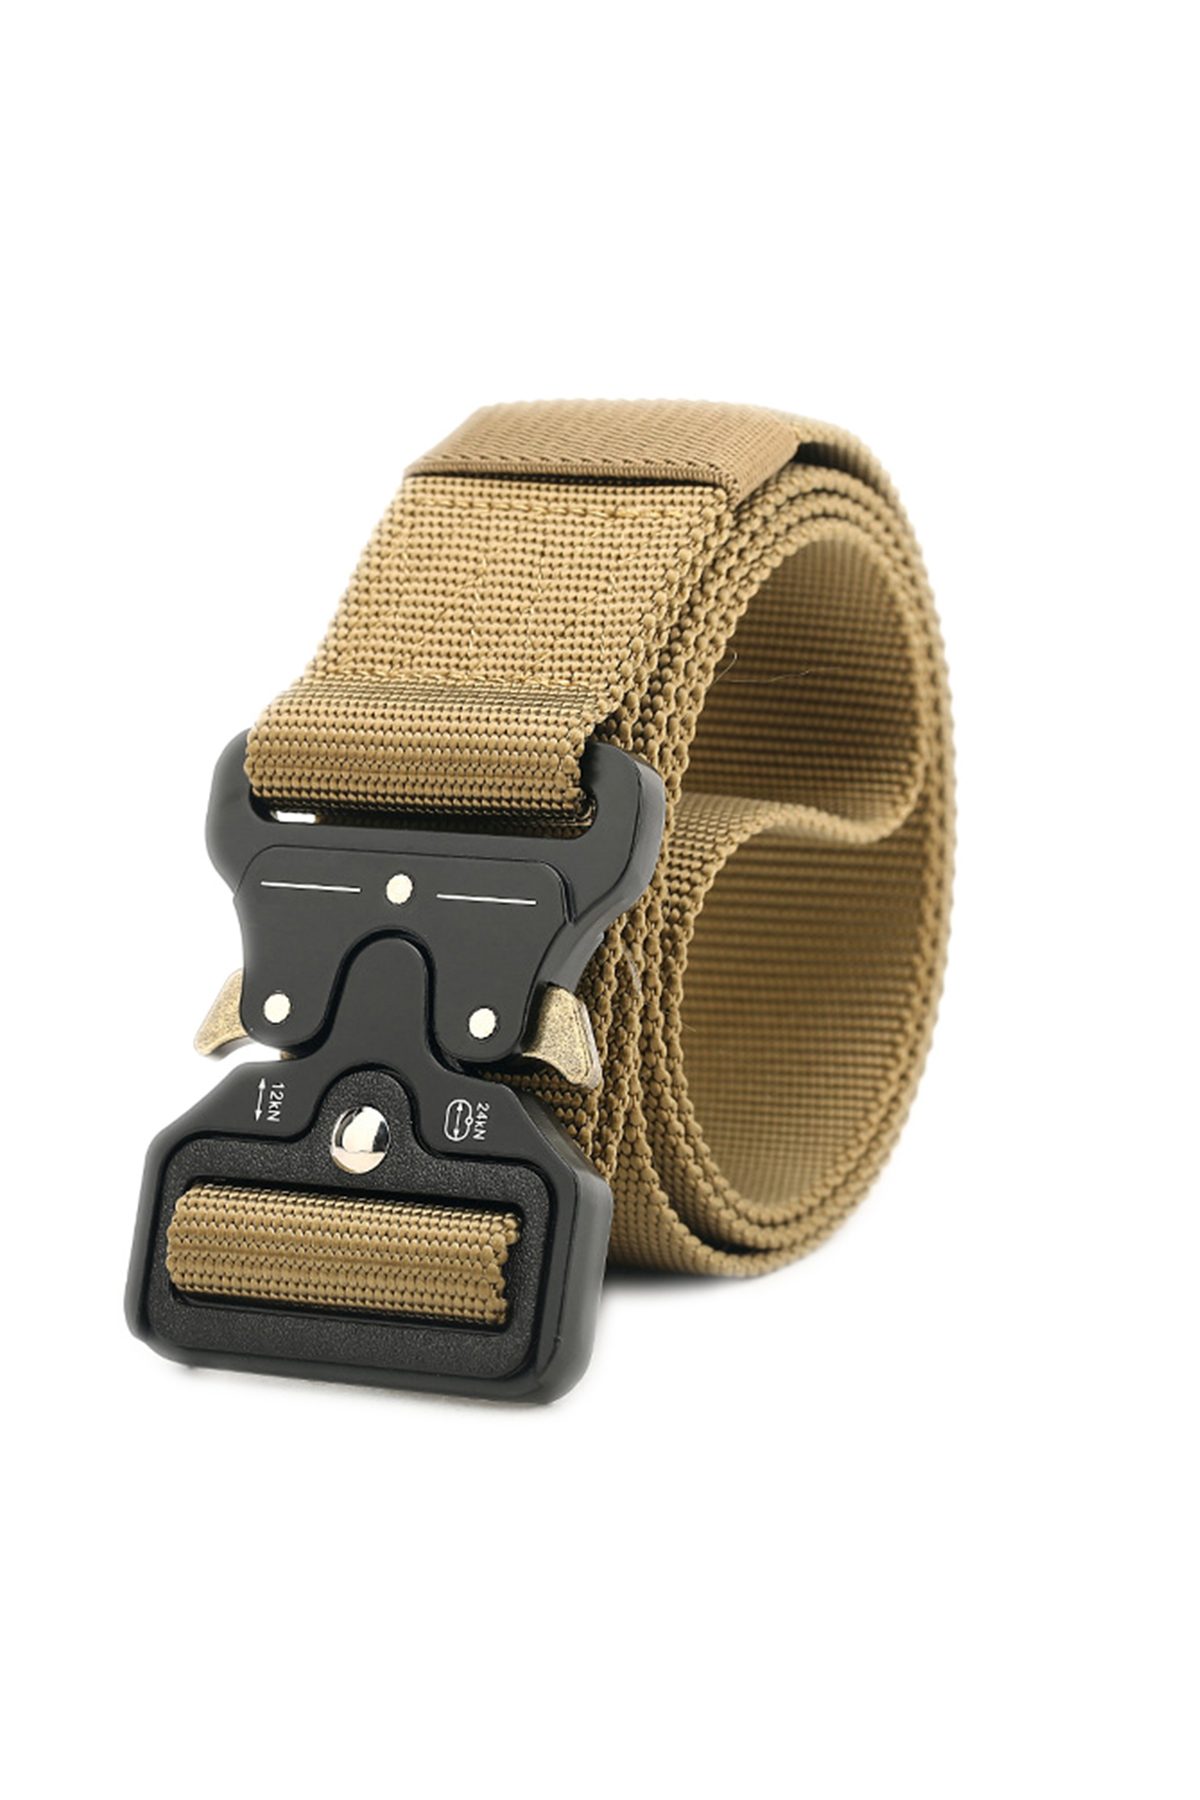 Khaki Military Style Tactical Belt Nylon Belt with Heavy-Duty Quick-Release Metal Buckle